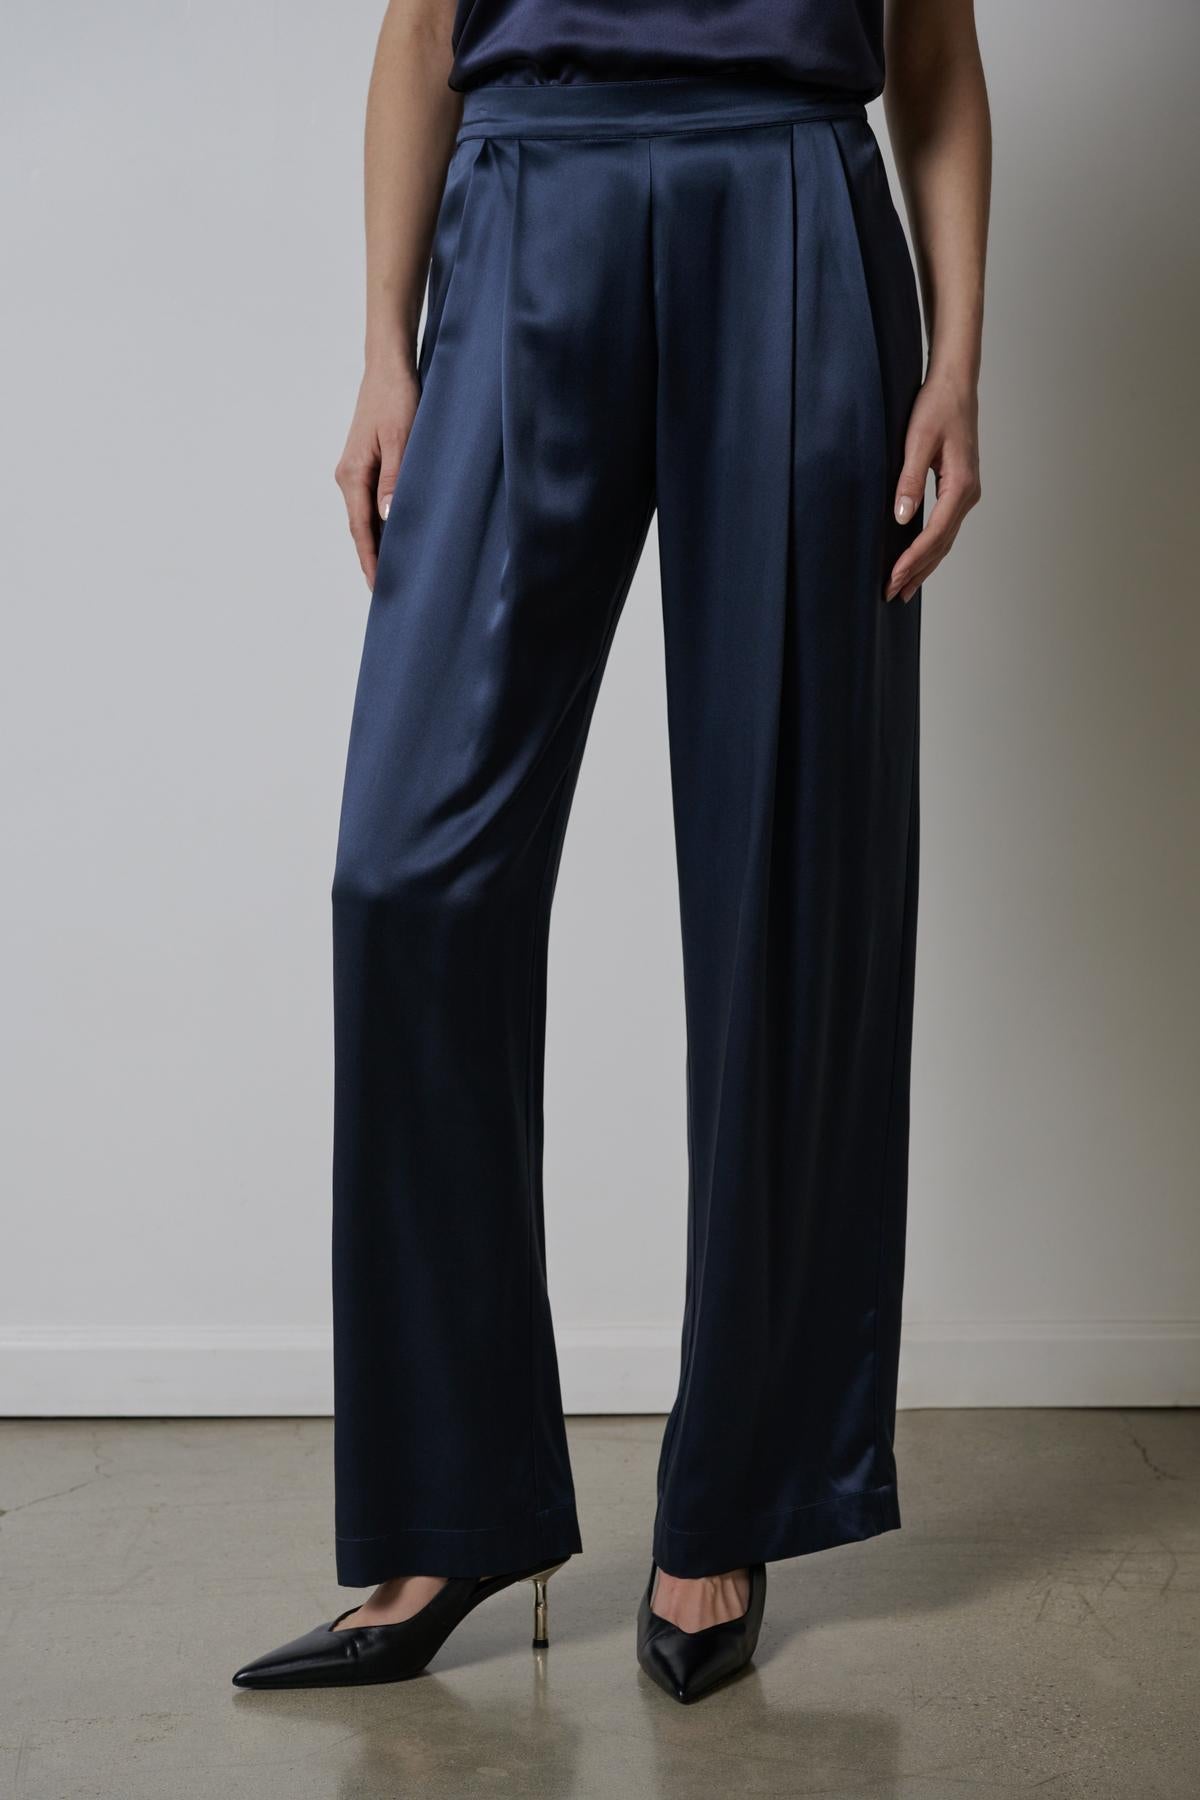 A woman wearing Velvet by Jenny Graham's MANHATTAN PANT and silk charmeuse trousers.-36594676465857